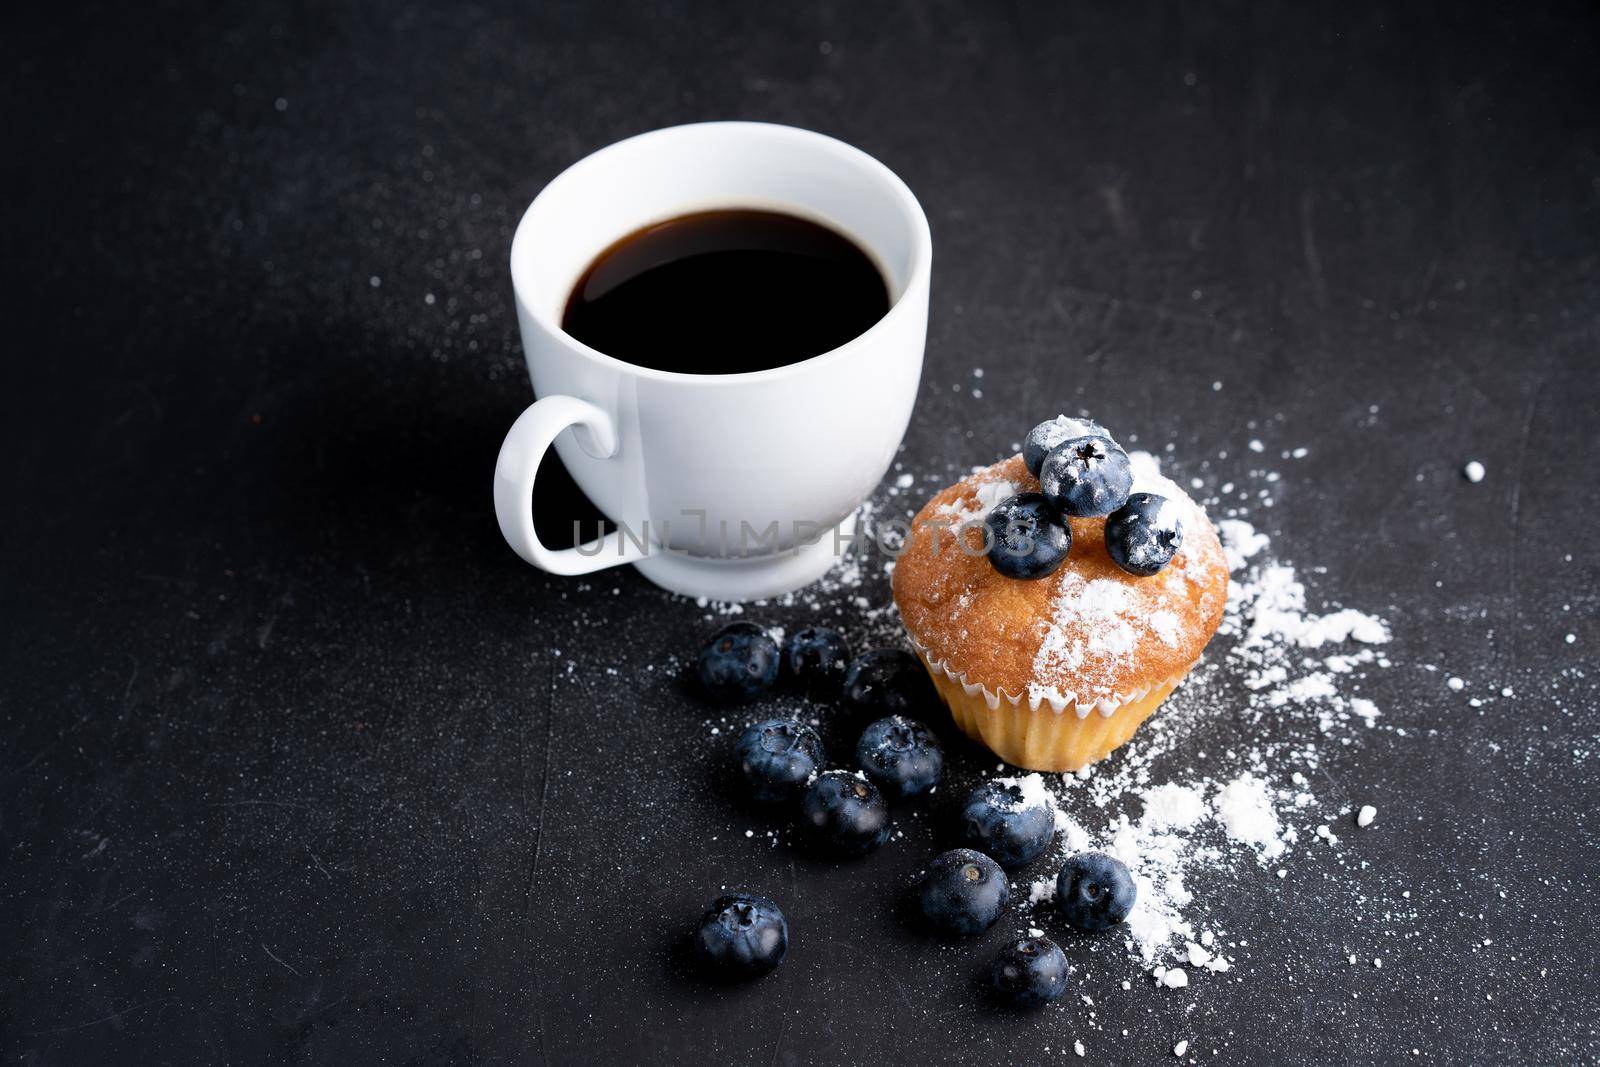 Blueberry antioxidant organic superfood and sweet muffin with cup of coffe Concept for healthy eating and dieting nutrition Top view on dark black background